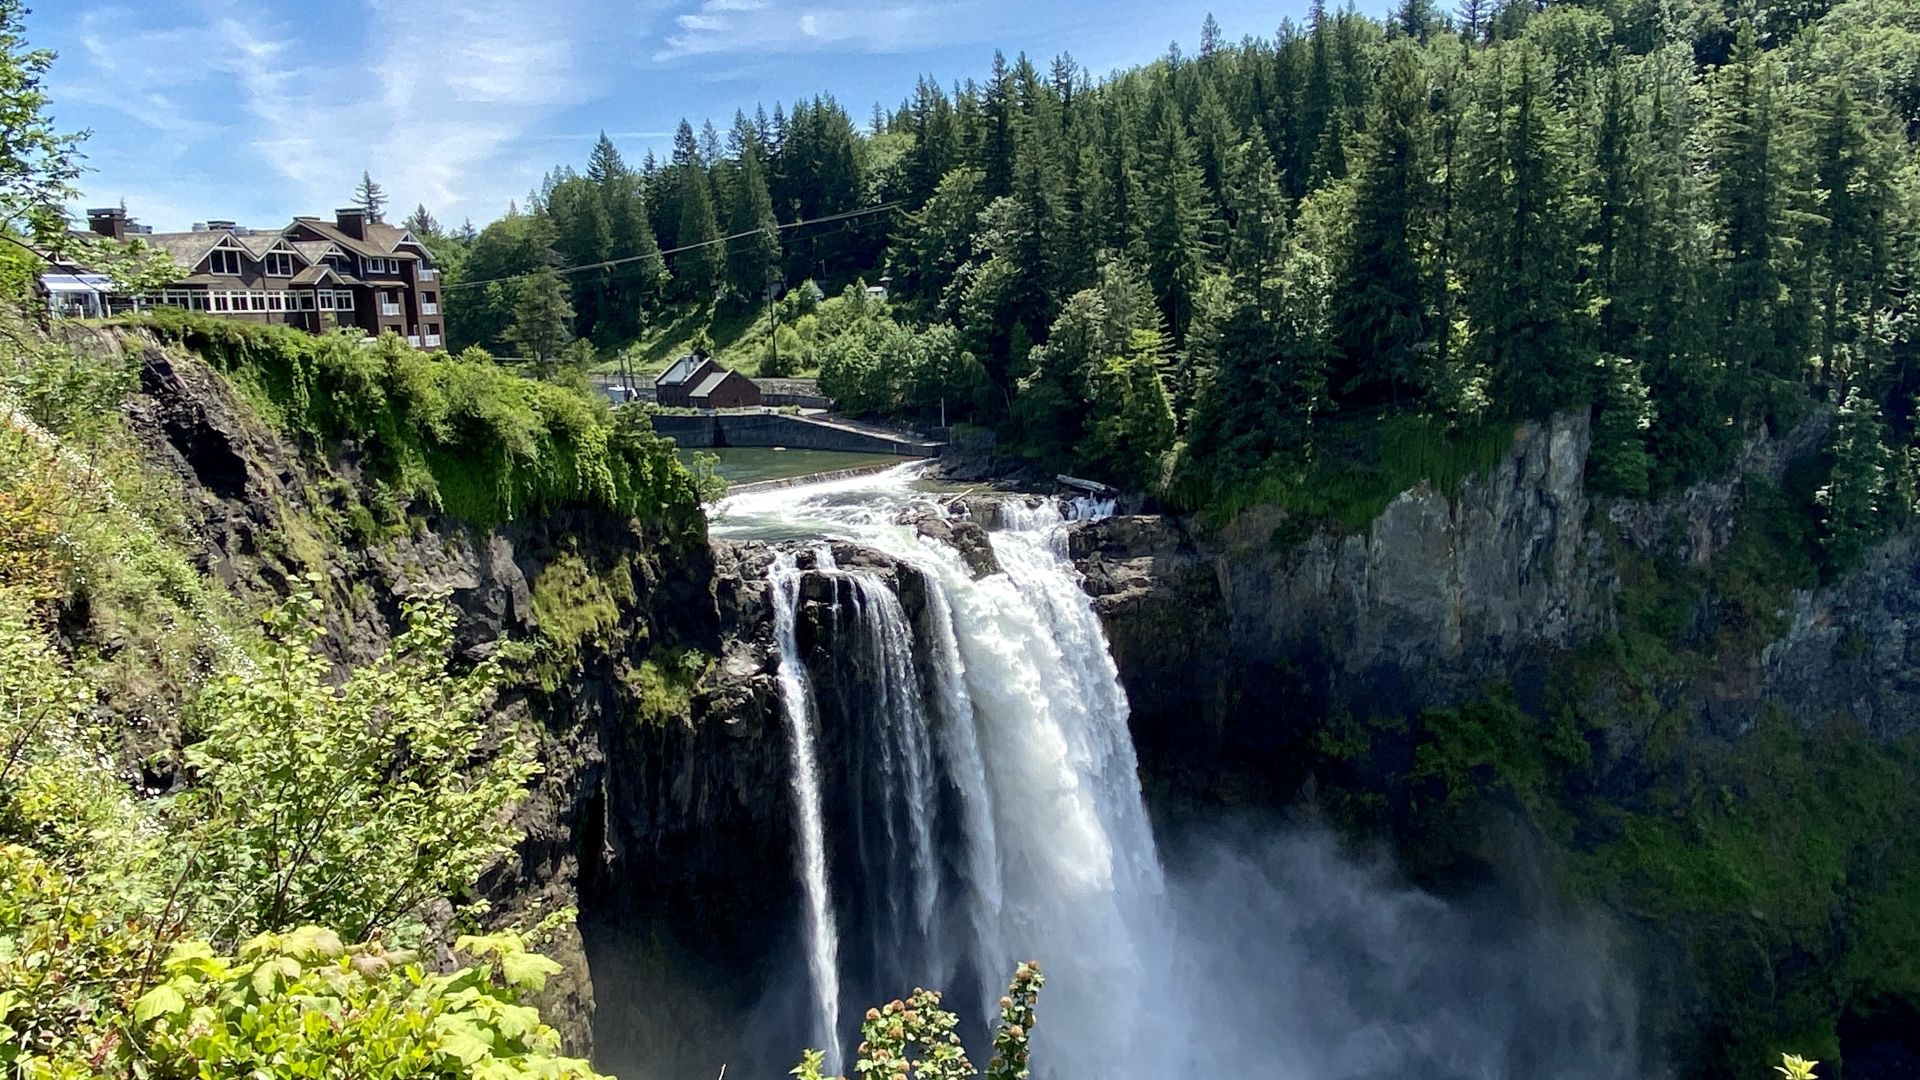 A Large Waterfall In A Forest With Snoqualmie Falls In The Background